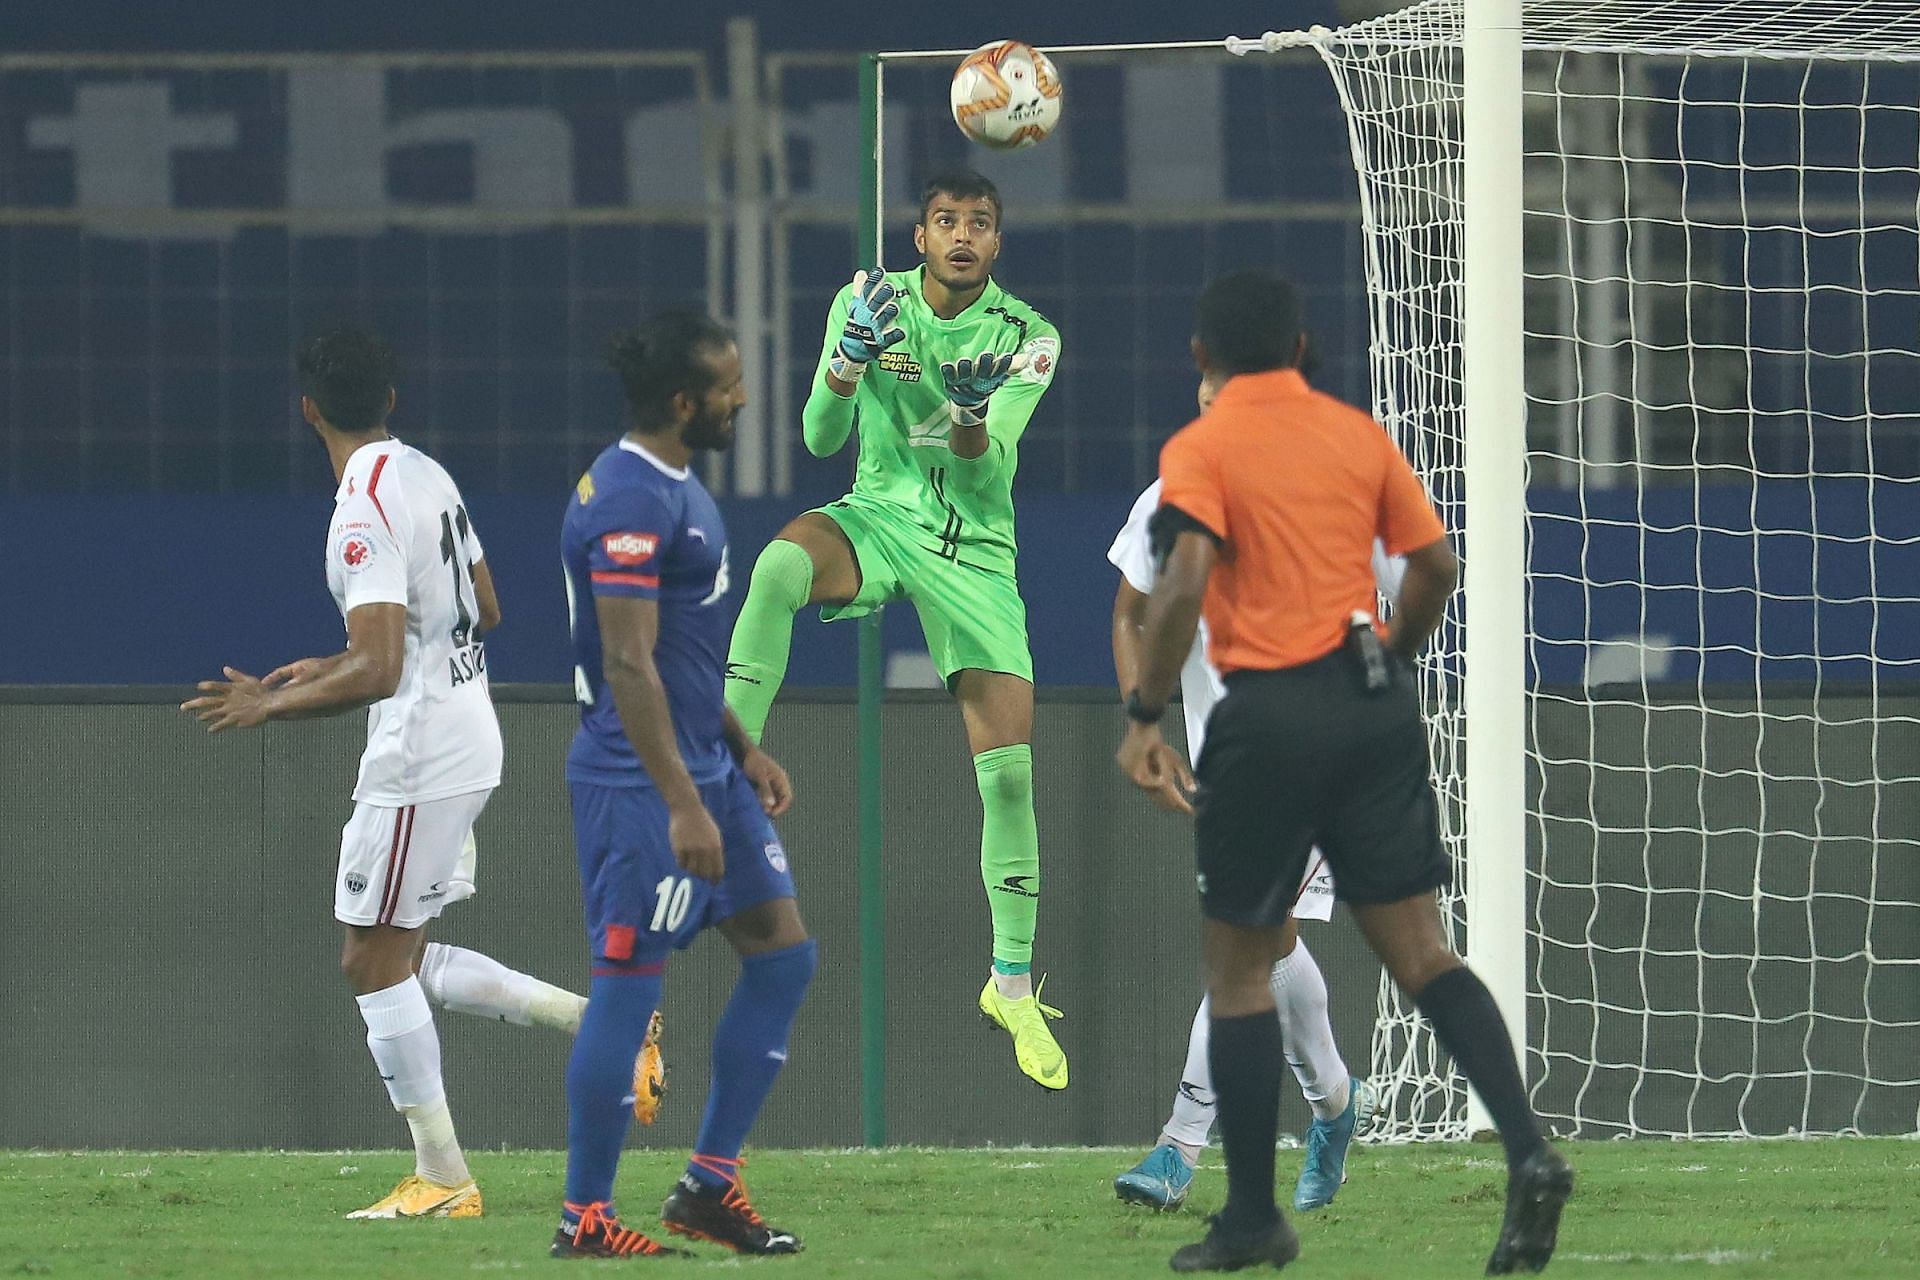 Action from Bengaluru FC vs NorthEast United FC game on Matchday 21 of Indian Super League 2020-21 (Image Courtesy: Indian Super League)